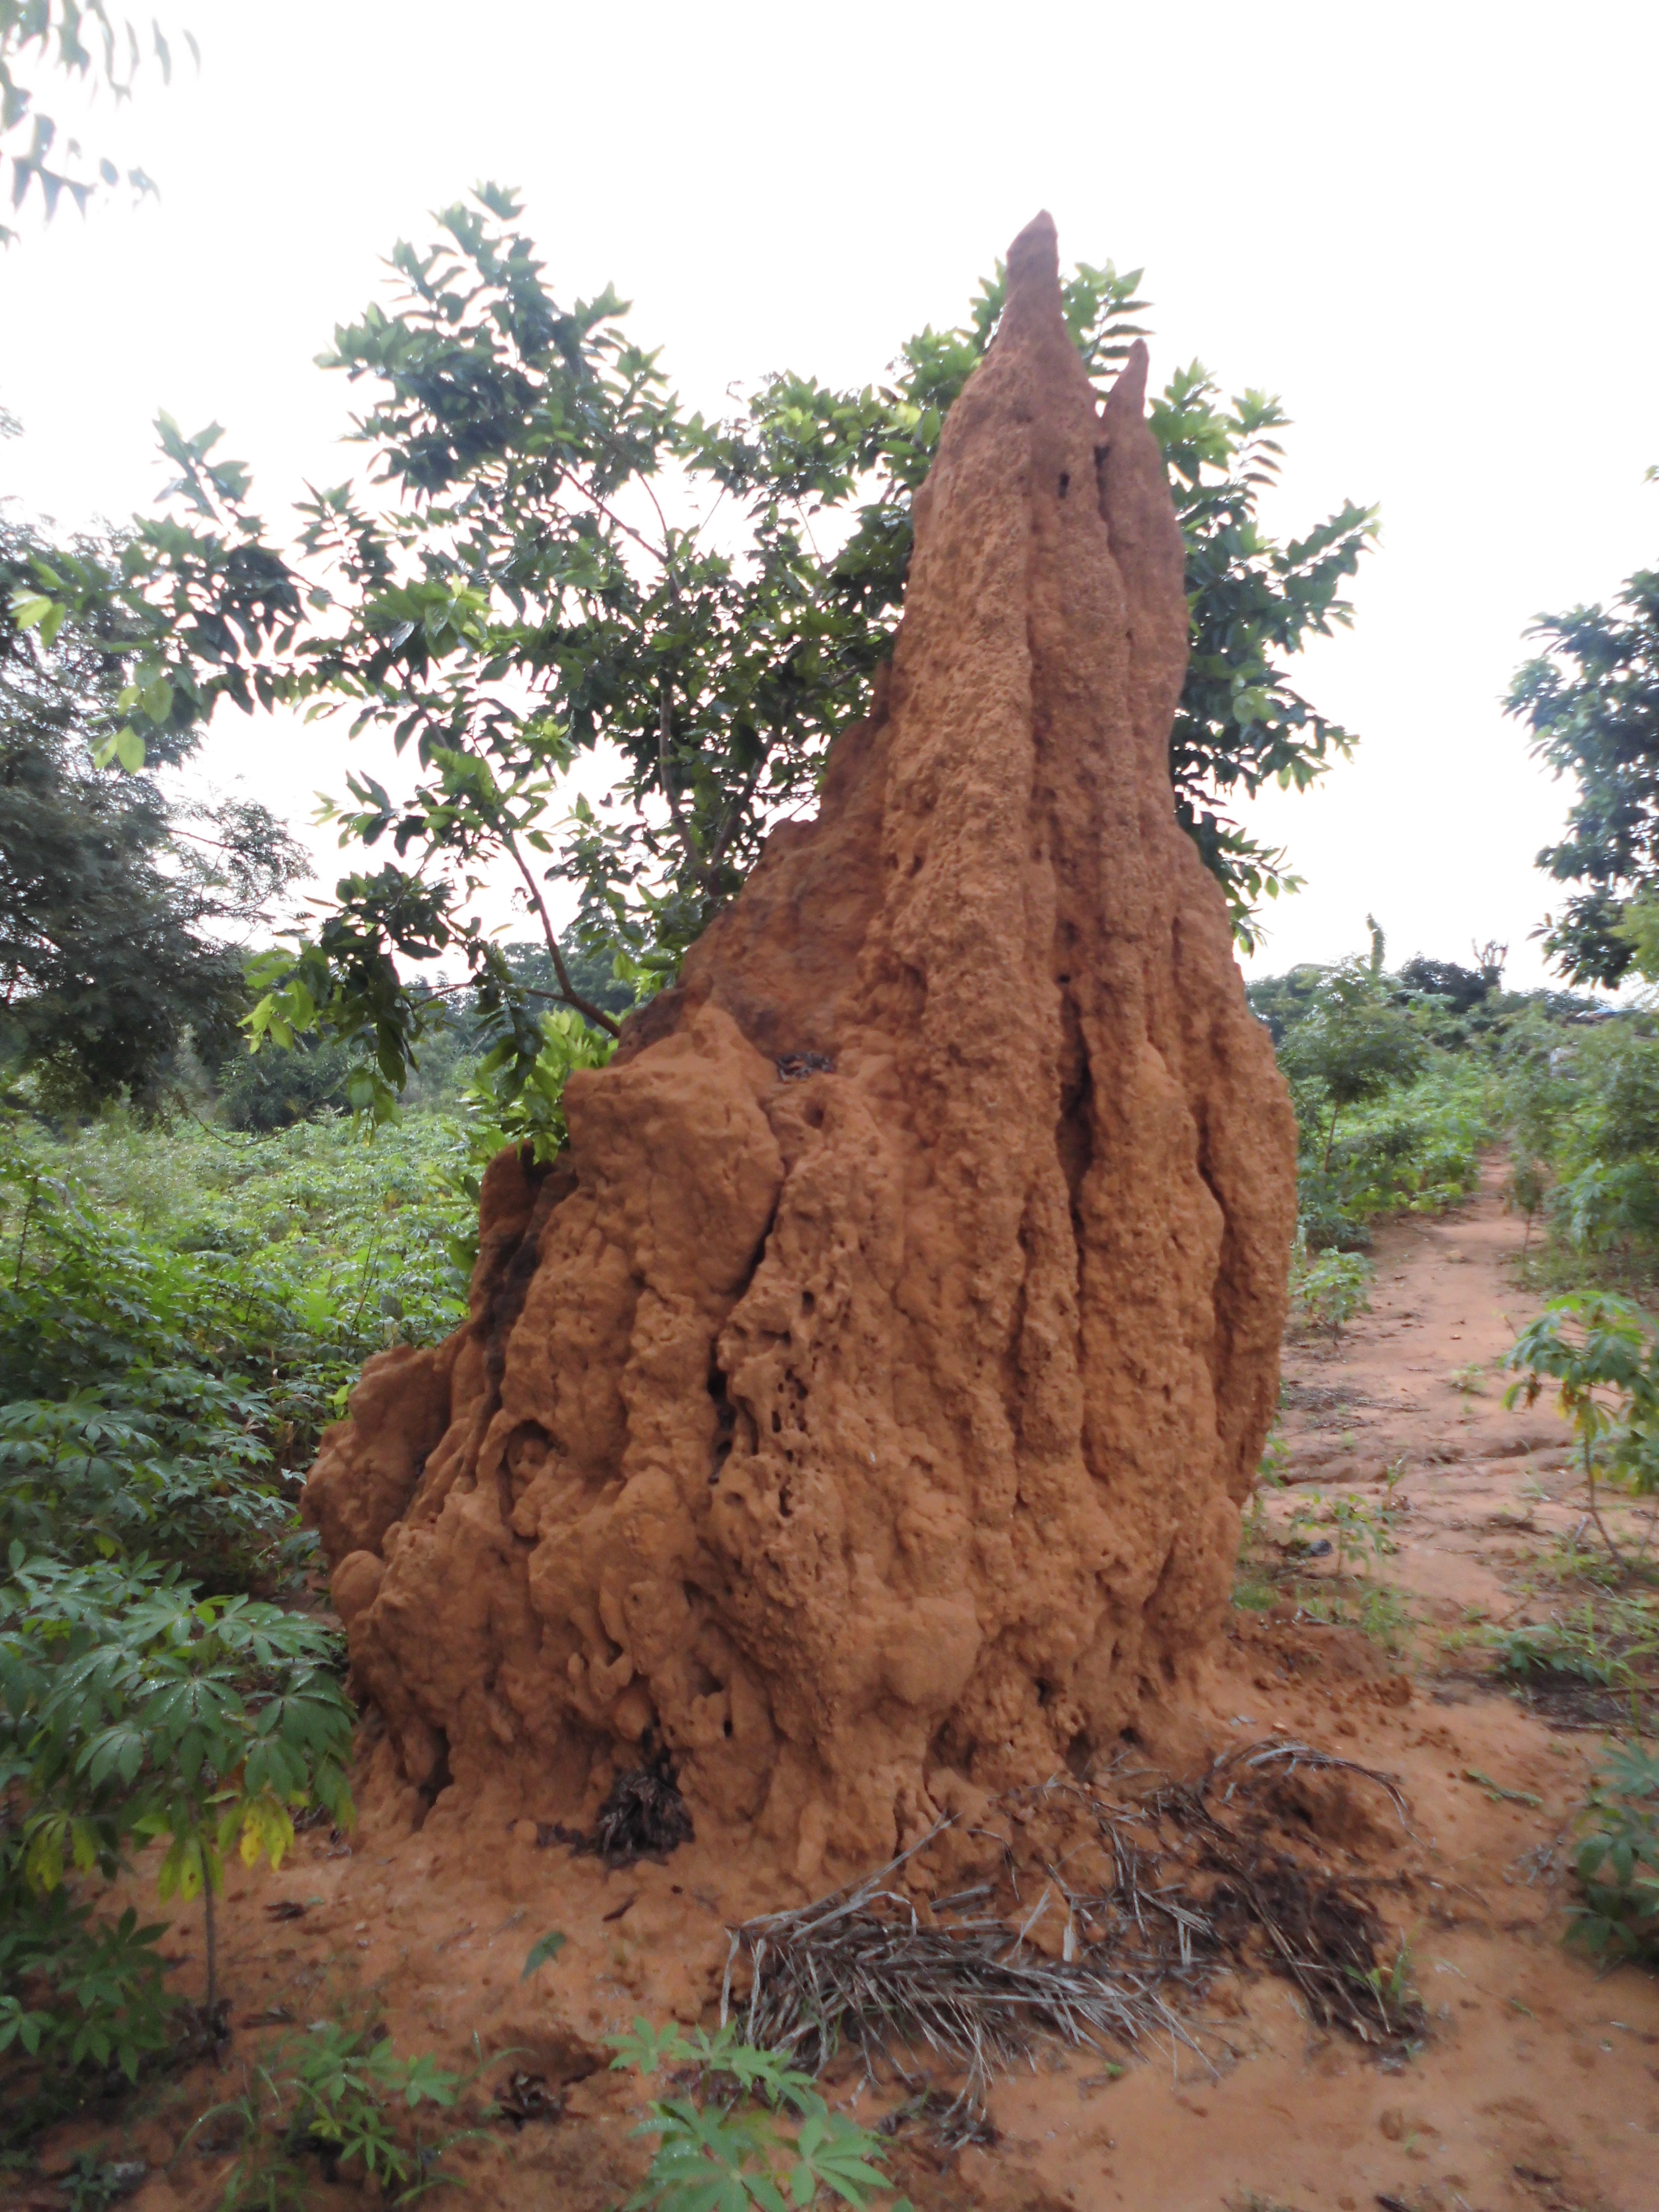 Large termite mound in Ghana